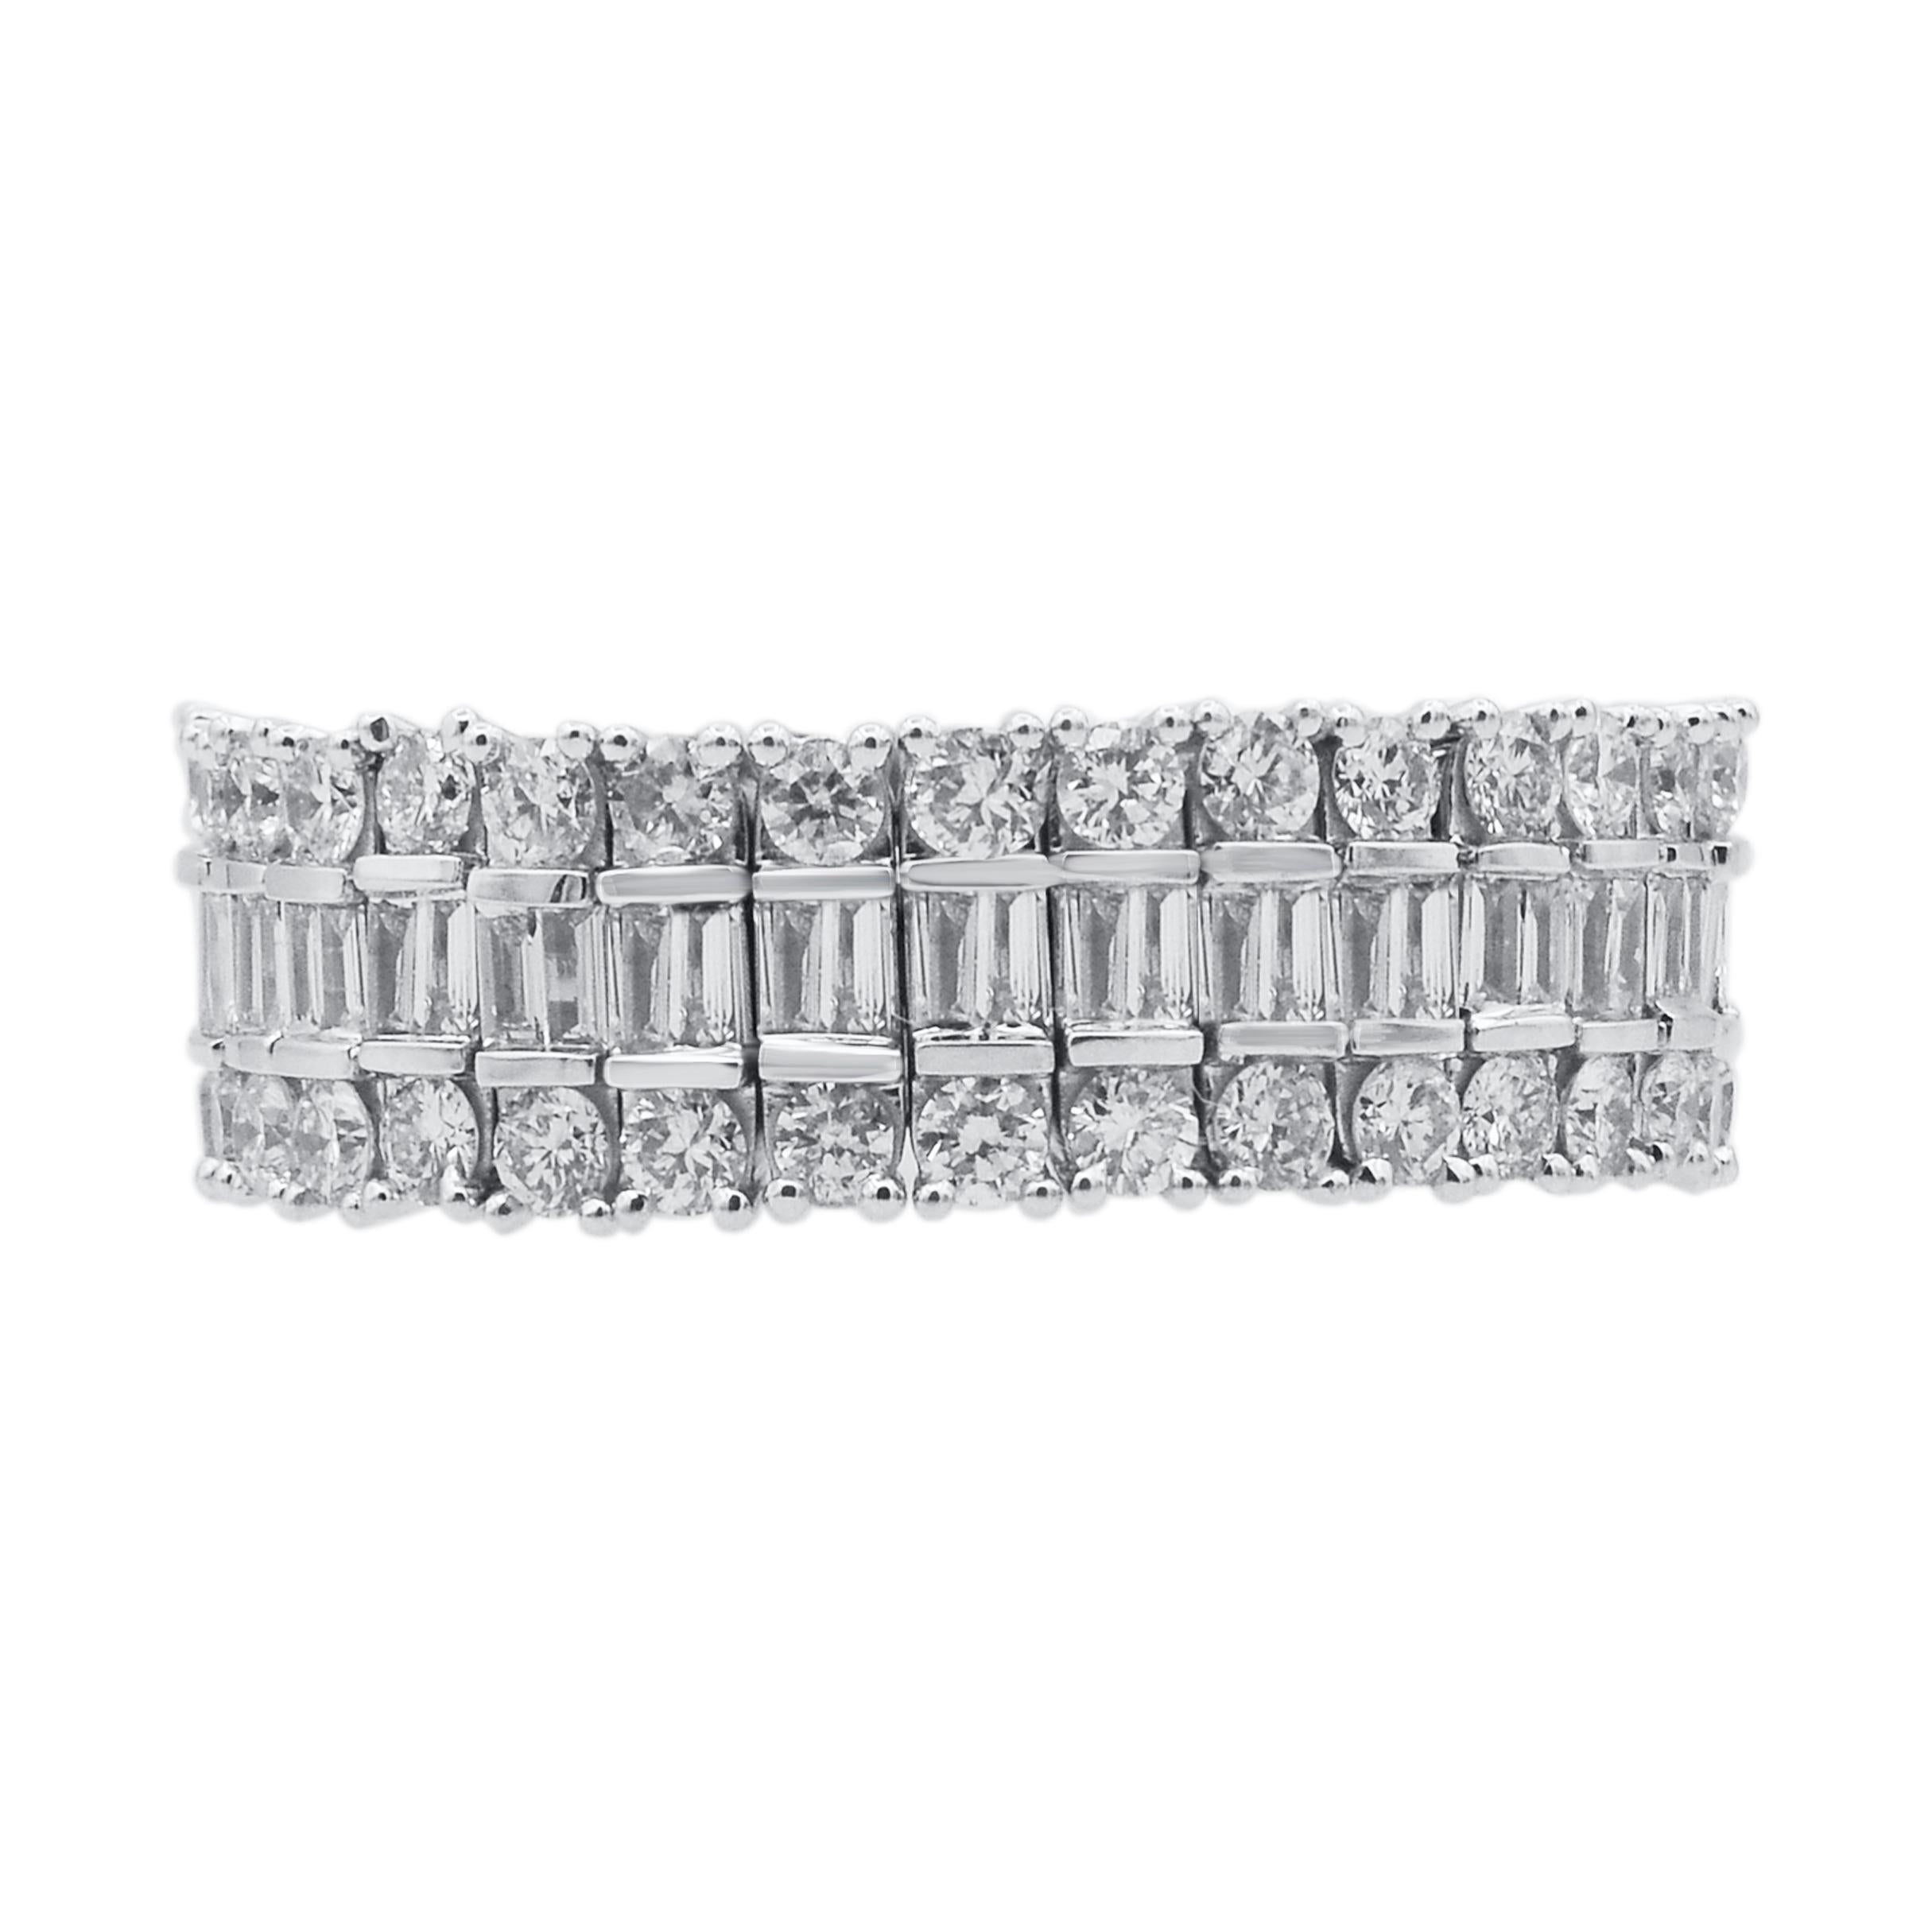 Honor the women you love with this eternity wedding band is expertly crafted in 14 Karat White Gold and features 128 brilliant cut round diamond and baguette diamond set in prong & channel setting. This eternity band has high polish finish and is a